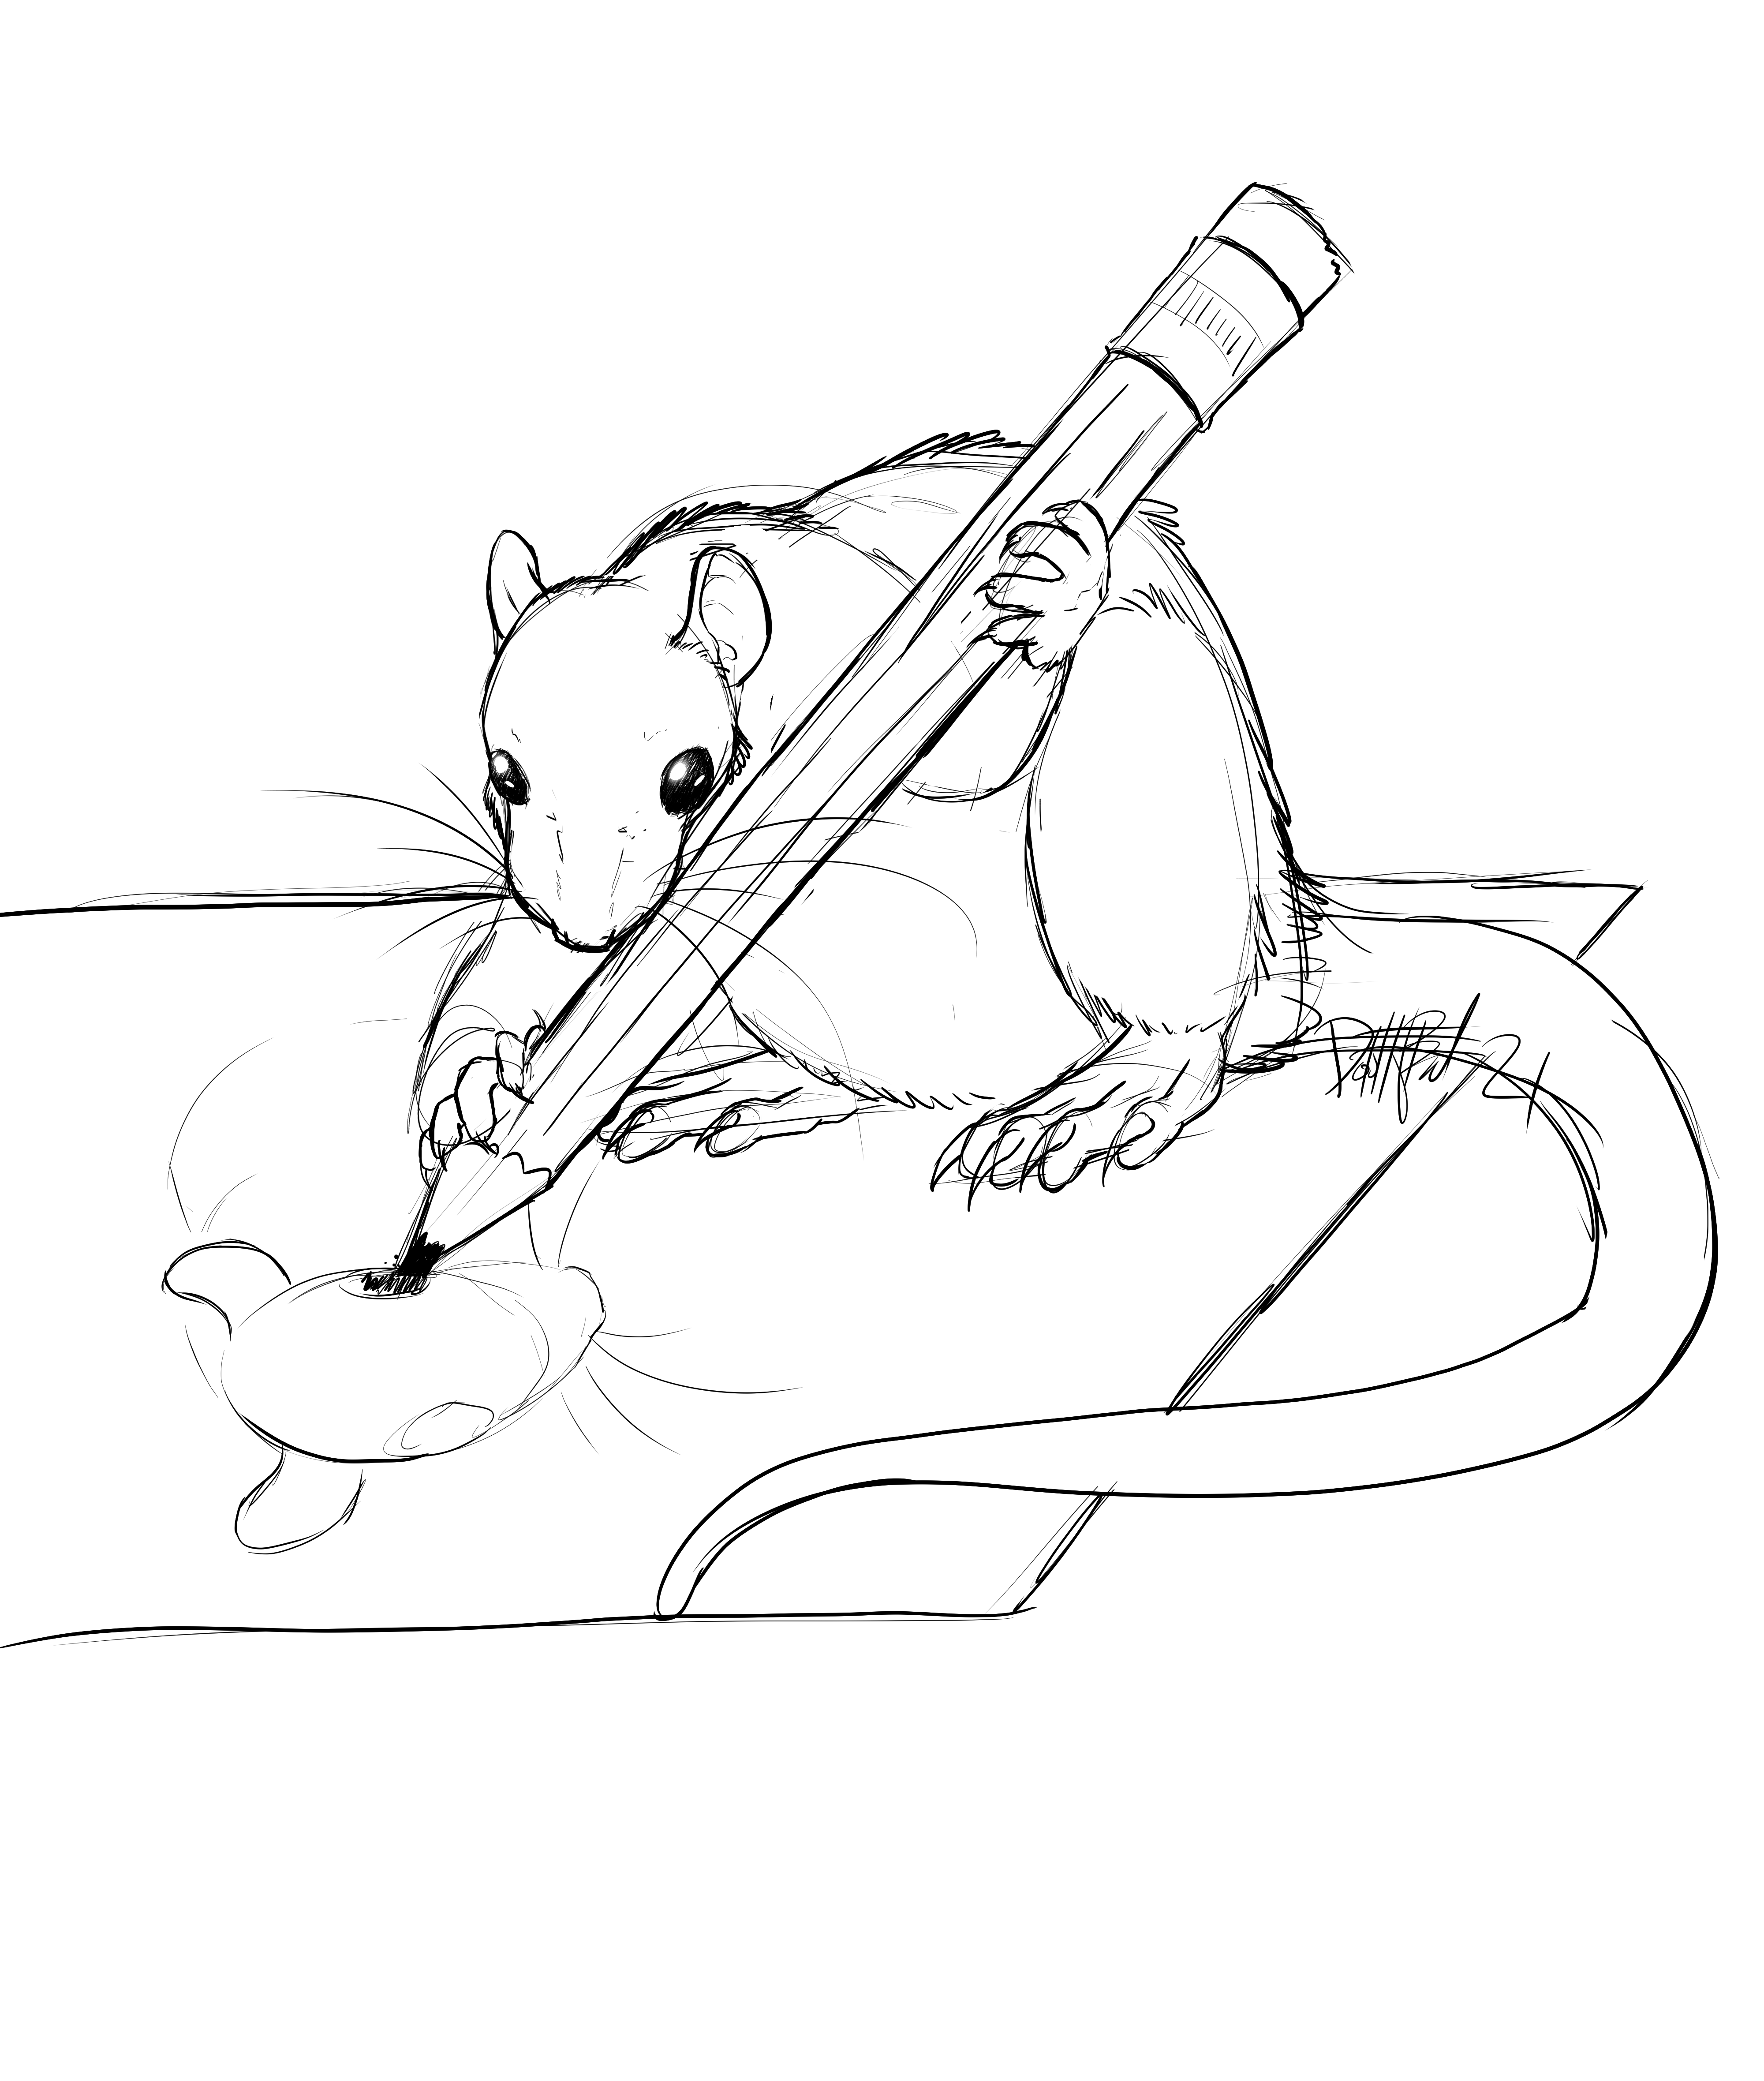 How To Draw A Rat Step By Step - 16 Easy Steps!